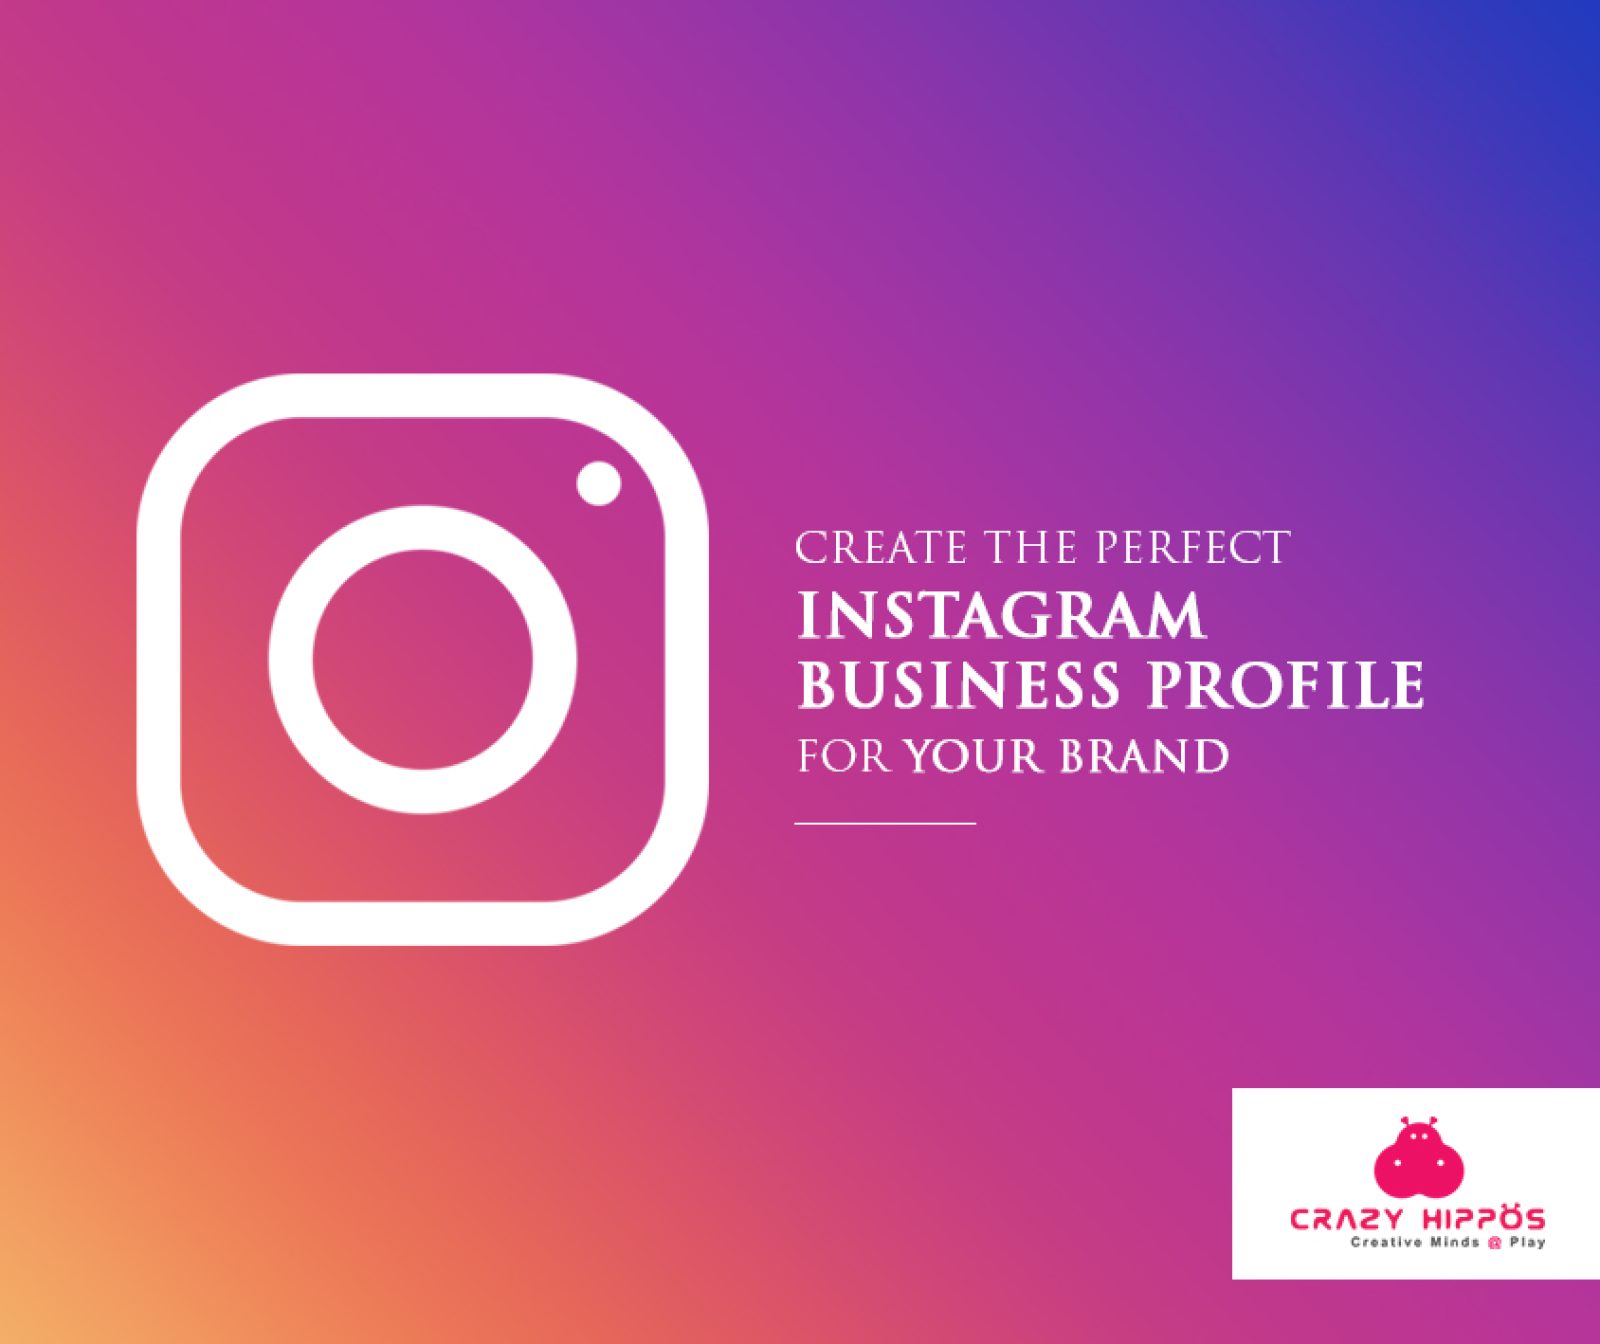 CREATE THE PERFECT INSTAGRAM BUSINESS PROFILE FOR YOUR BRAND